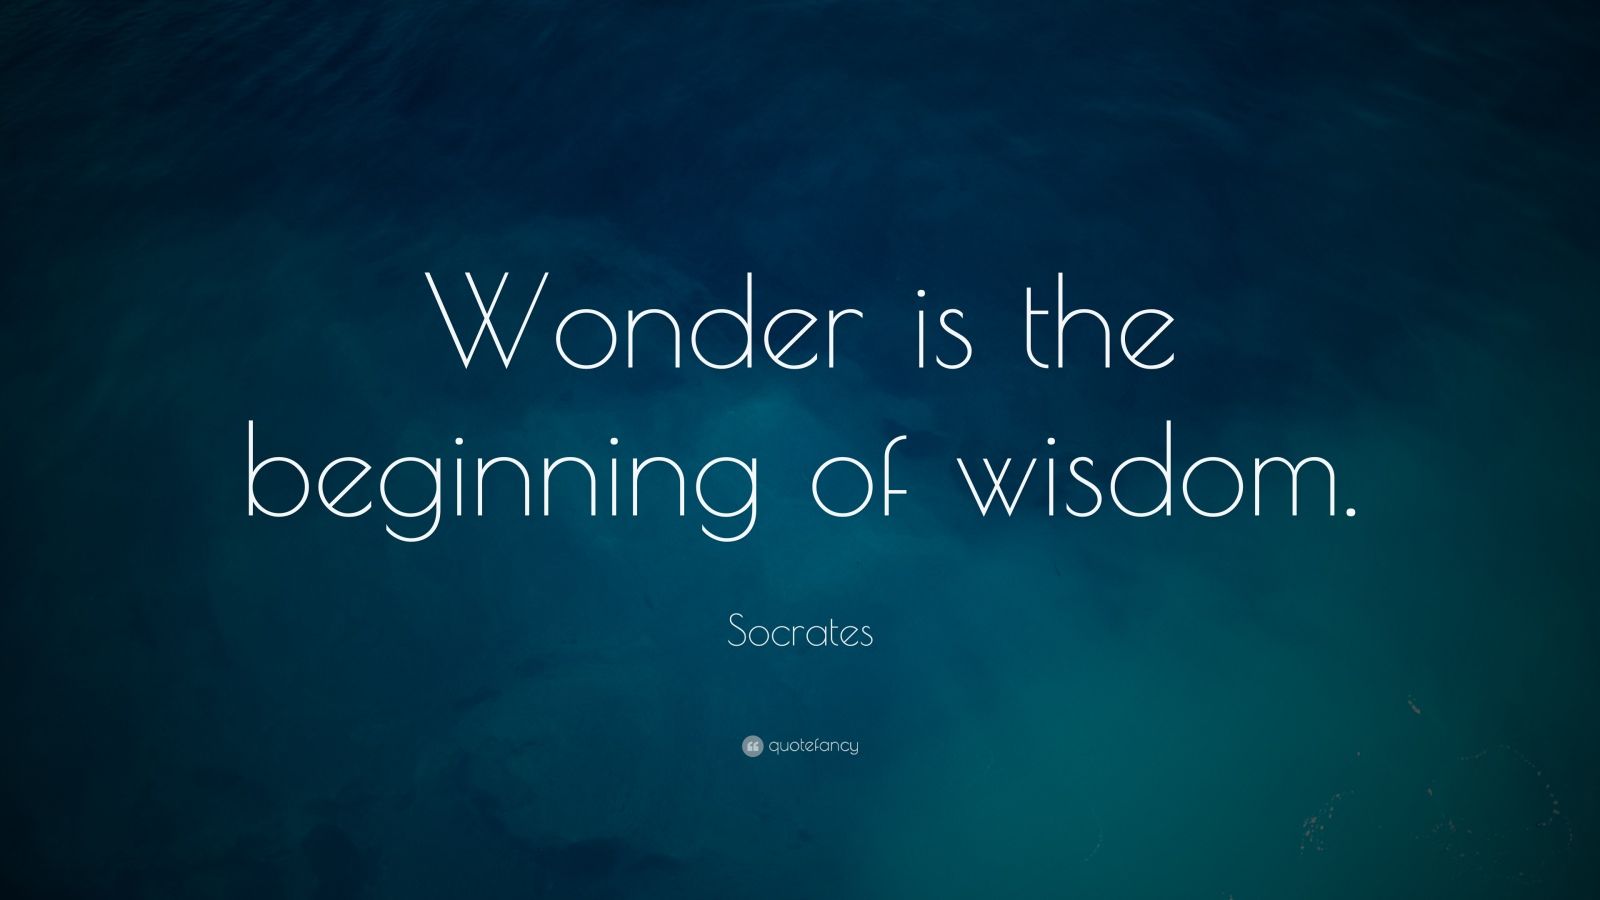 Socrates Quote: “Wonder is the beginning of wisdom.” (18 wallpapers